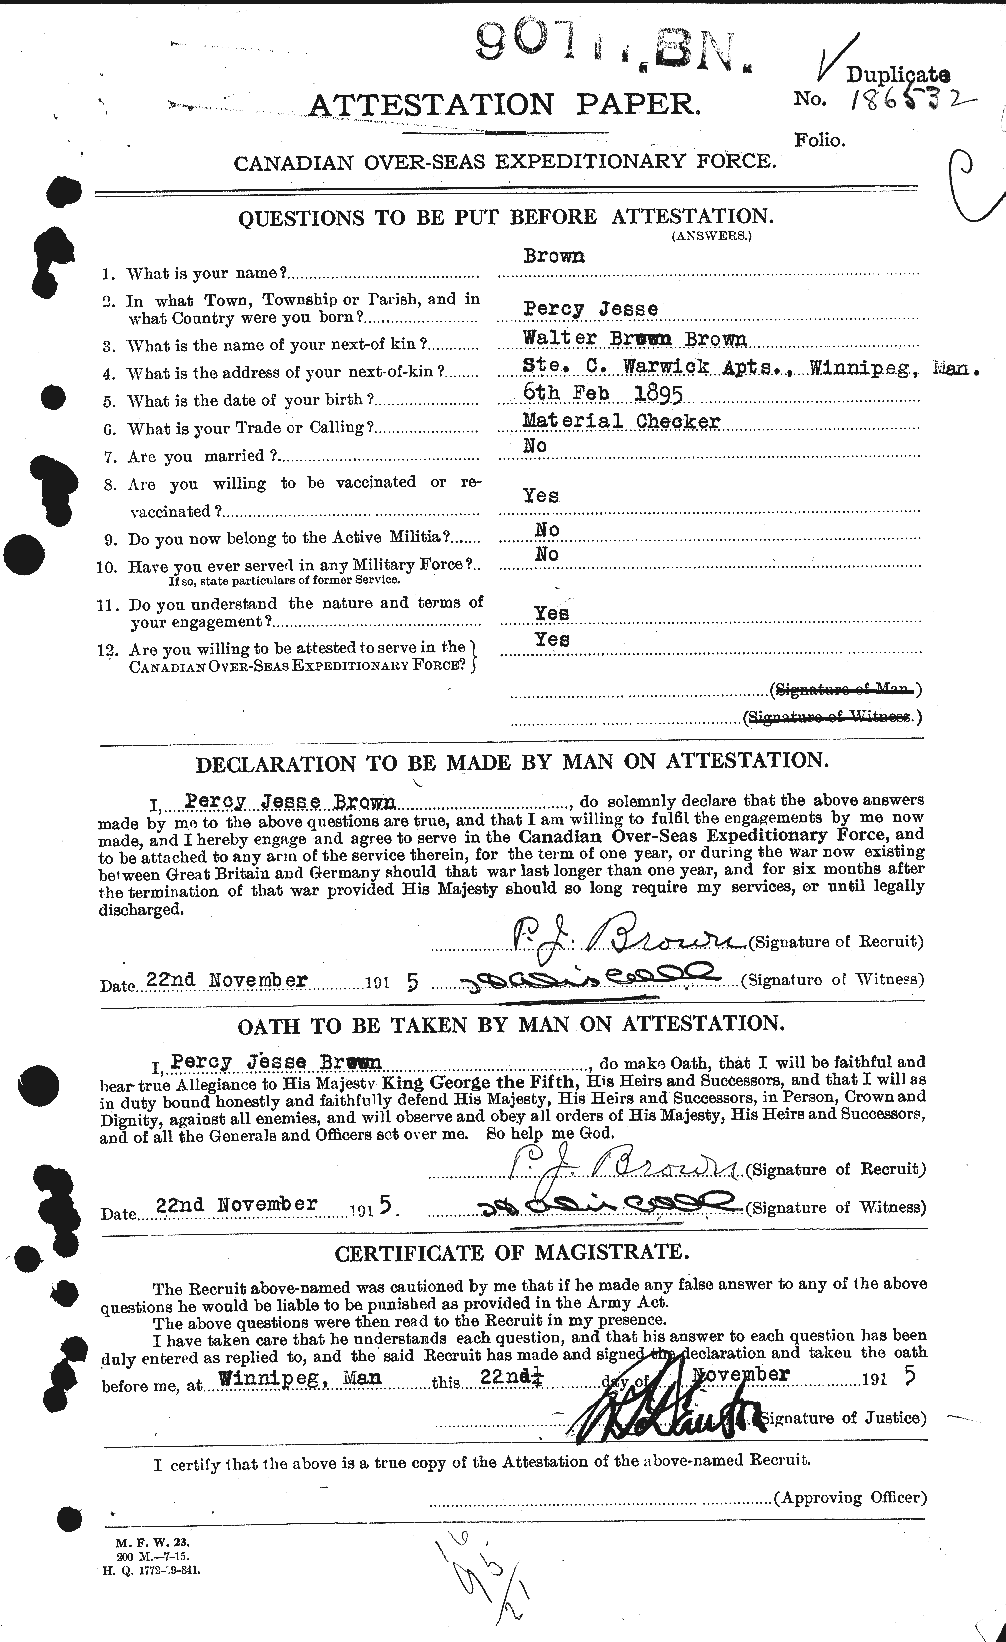 Personnel Records of the First World War - CEF 267171a